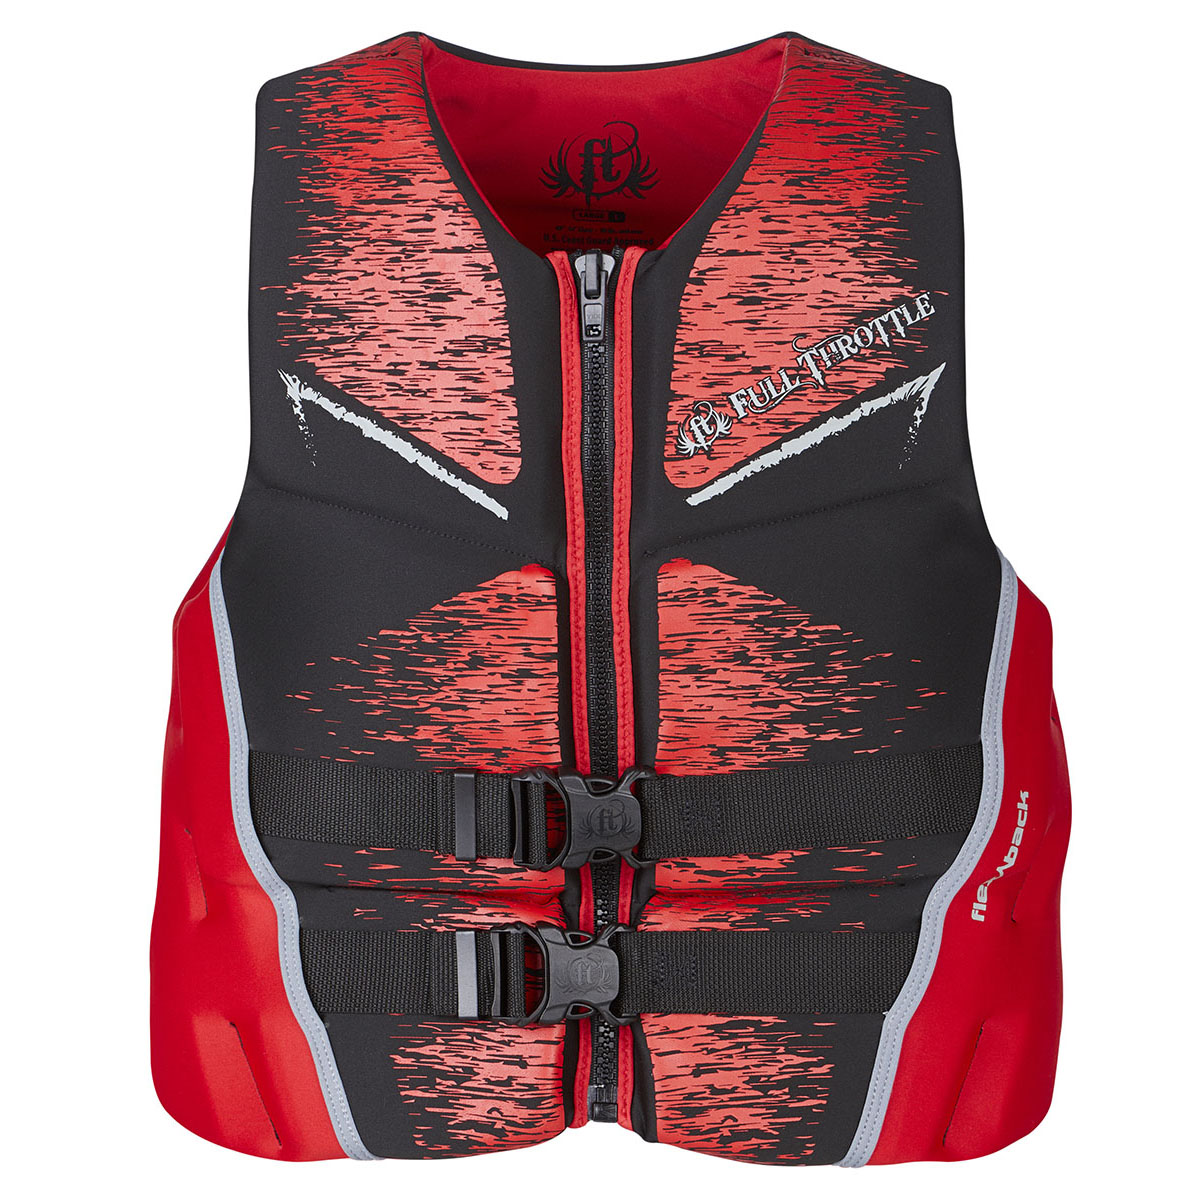 Absolute Outdoor 112200-300-050-19 Full Throttle Adult Life Jacket Nylon for sale online 